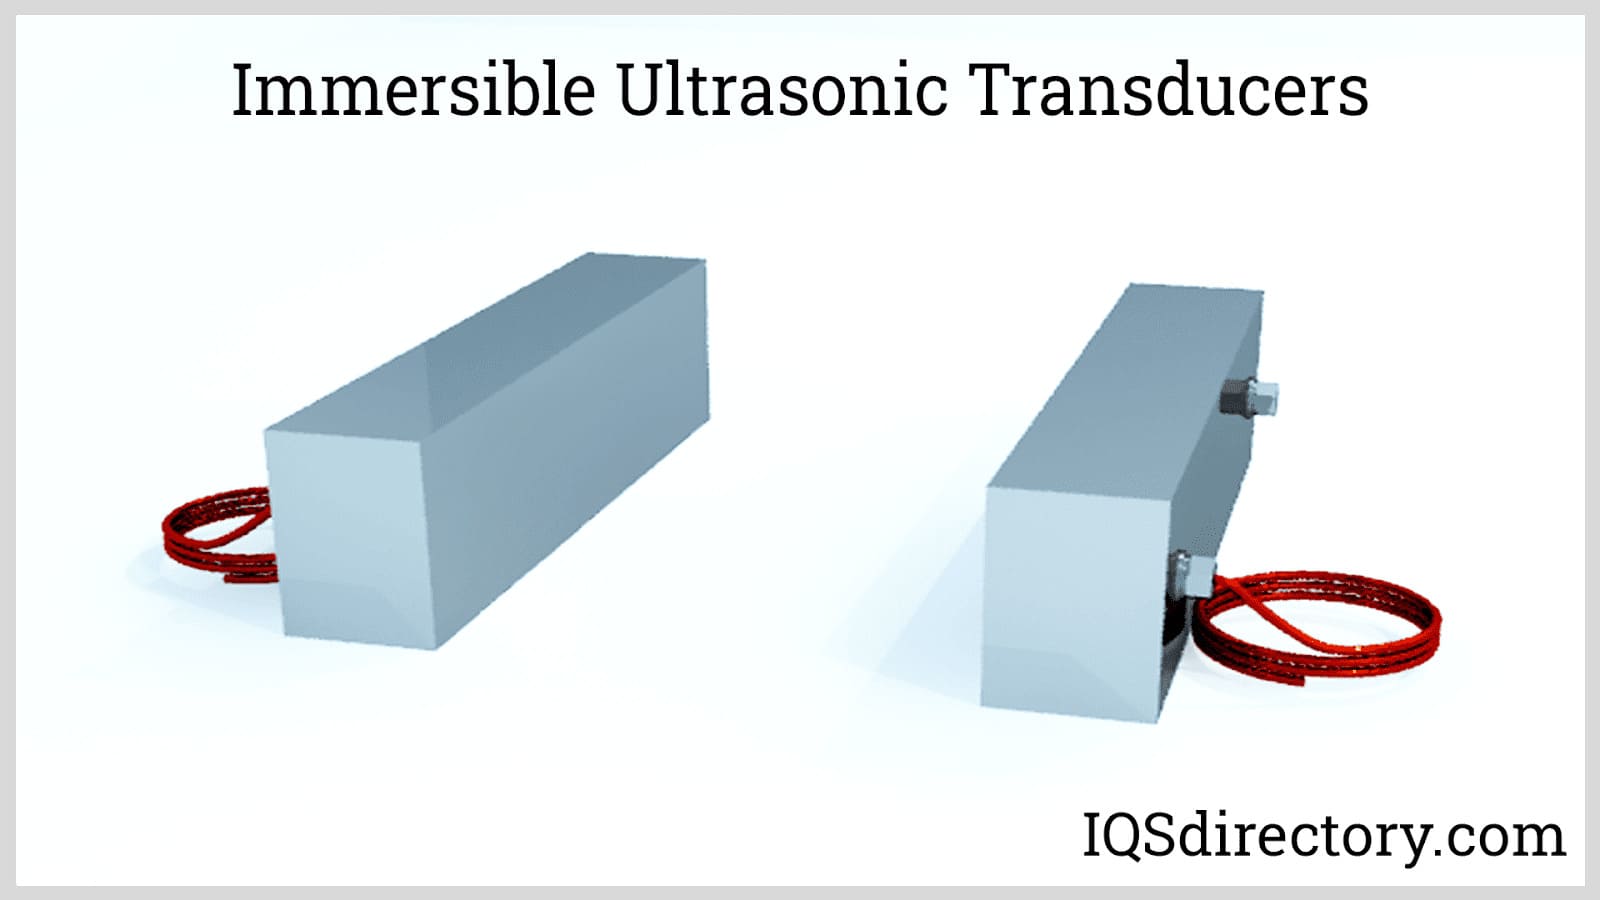 Immersible Ultrasonic Transducers